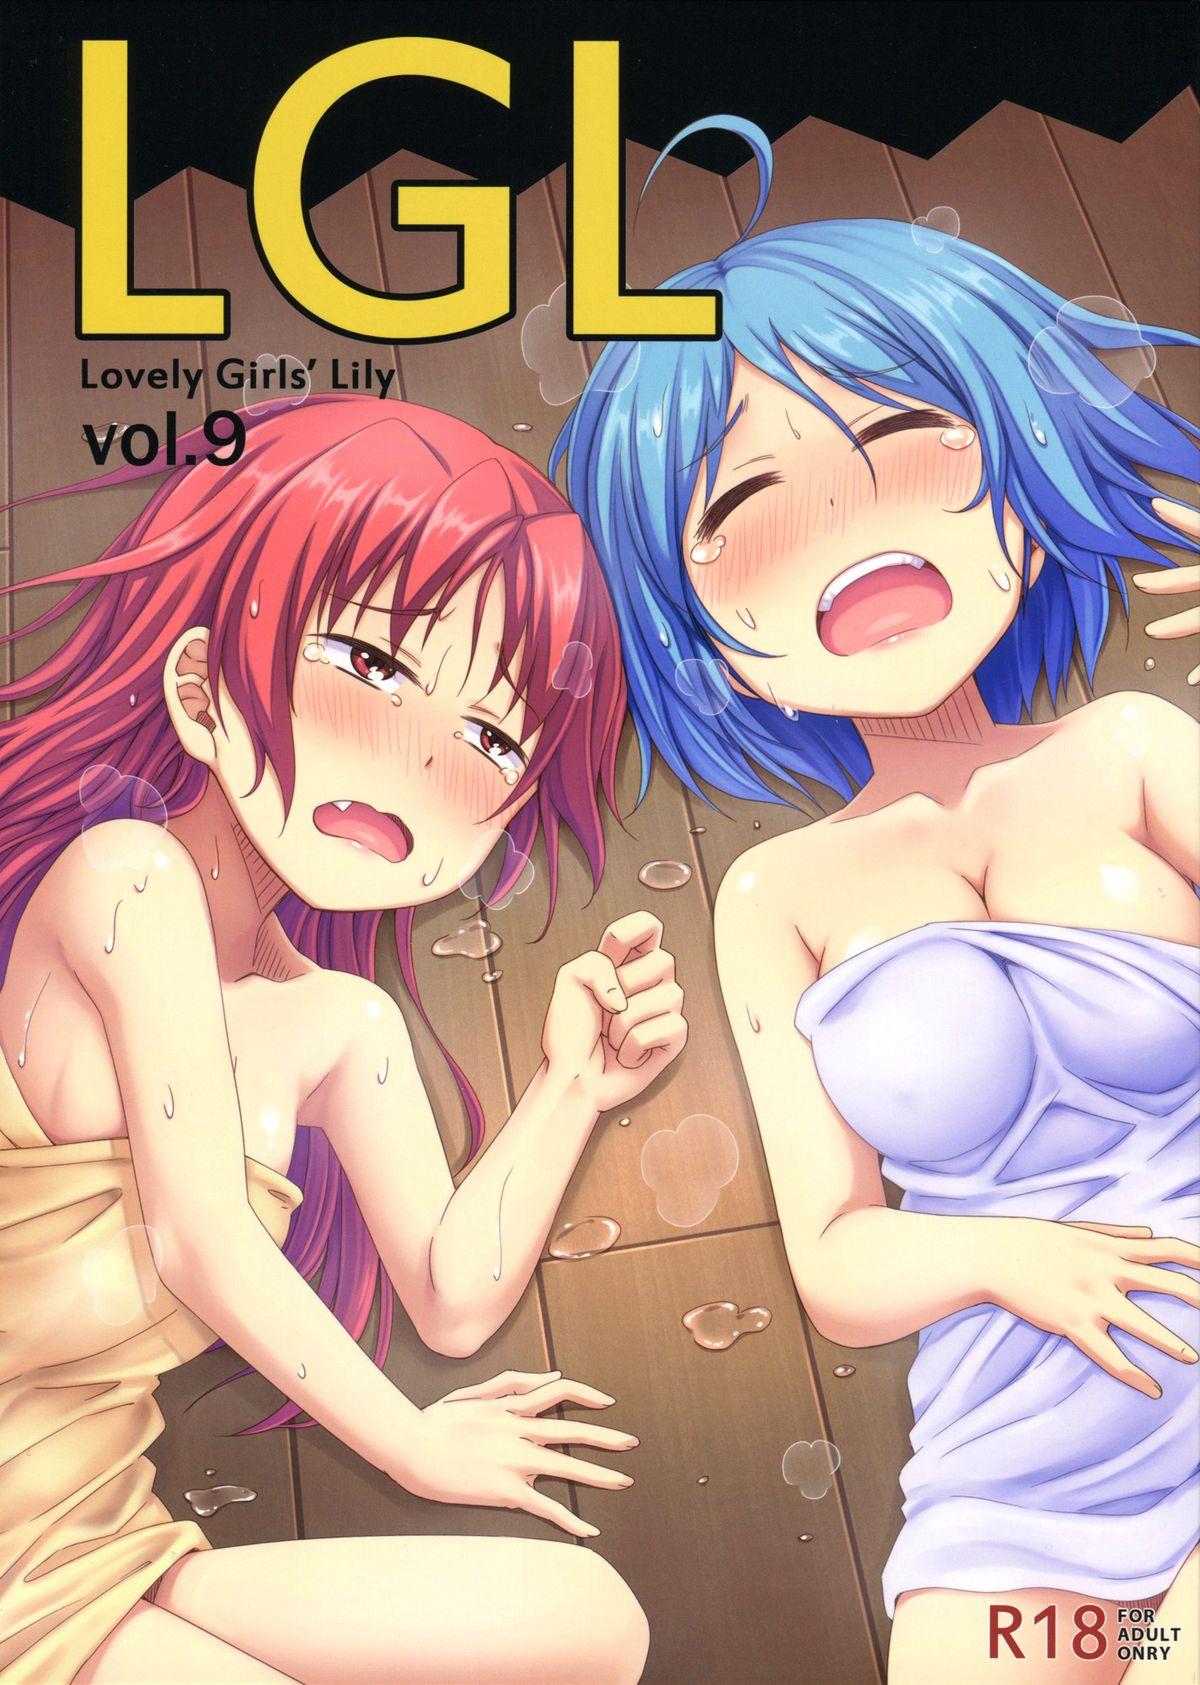 Caliente Lovely Girls' Lily Vol. 9 - Puella magi madoka magica Transsexual - Page 1